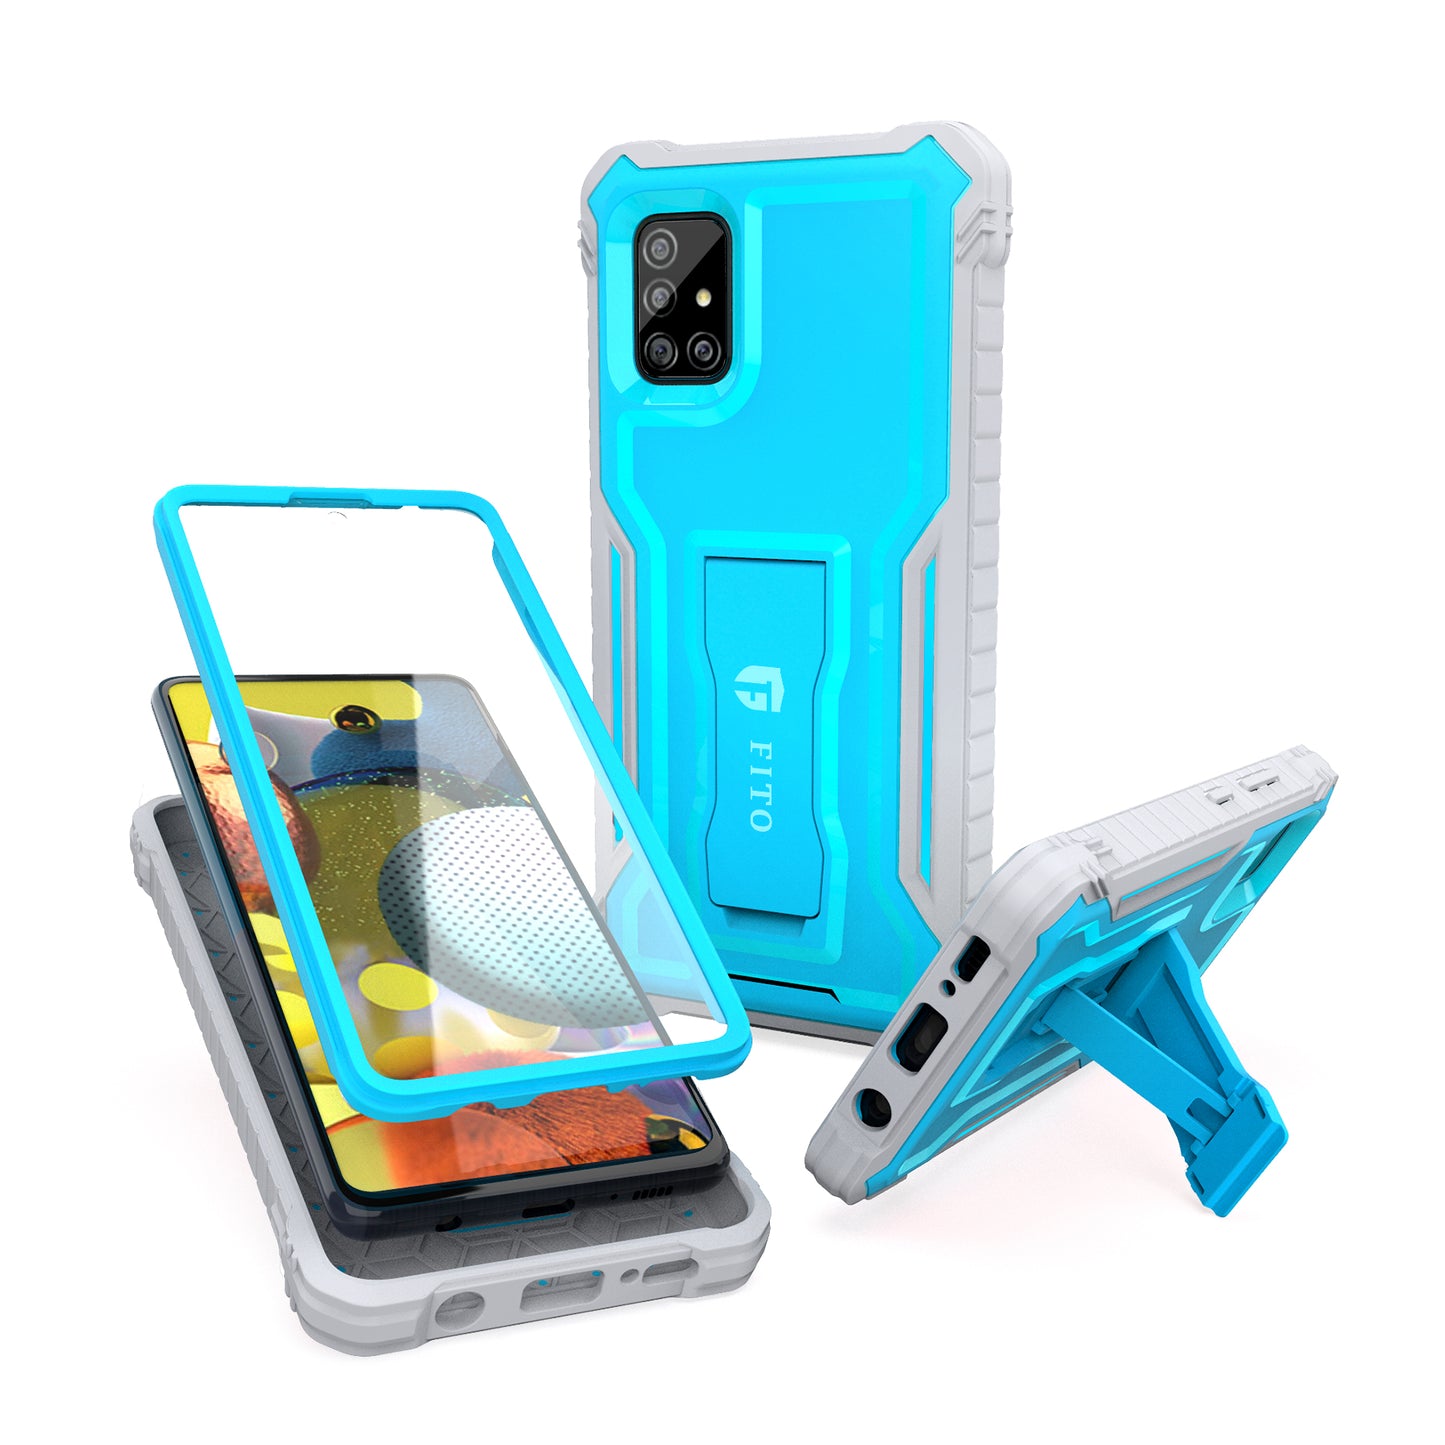 FITO Samsung Galaxy A51 5G Case, Dual Layer Shockproof Heavy Duty Case for Samsung A51 5G Phone with Screen Protector, Built-in Kickstand